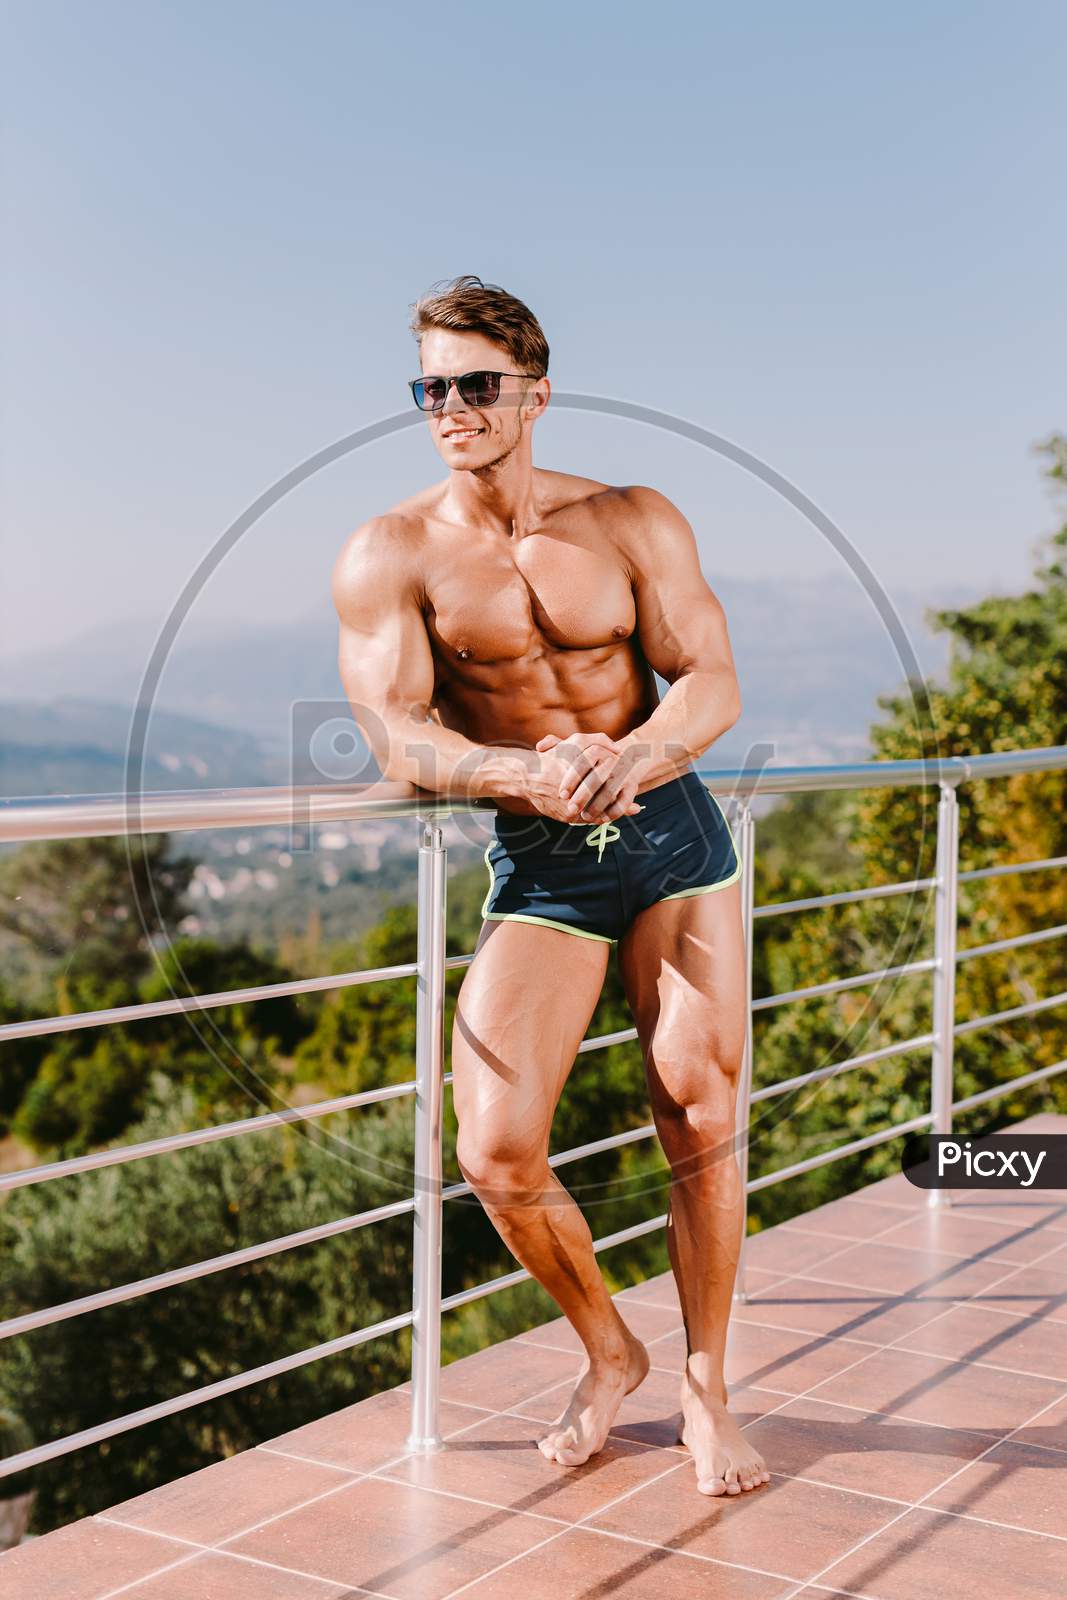 Photogenic Muscular Man Smiling And Posing Naked Torso In Swim Trunks And Sunglasses